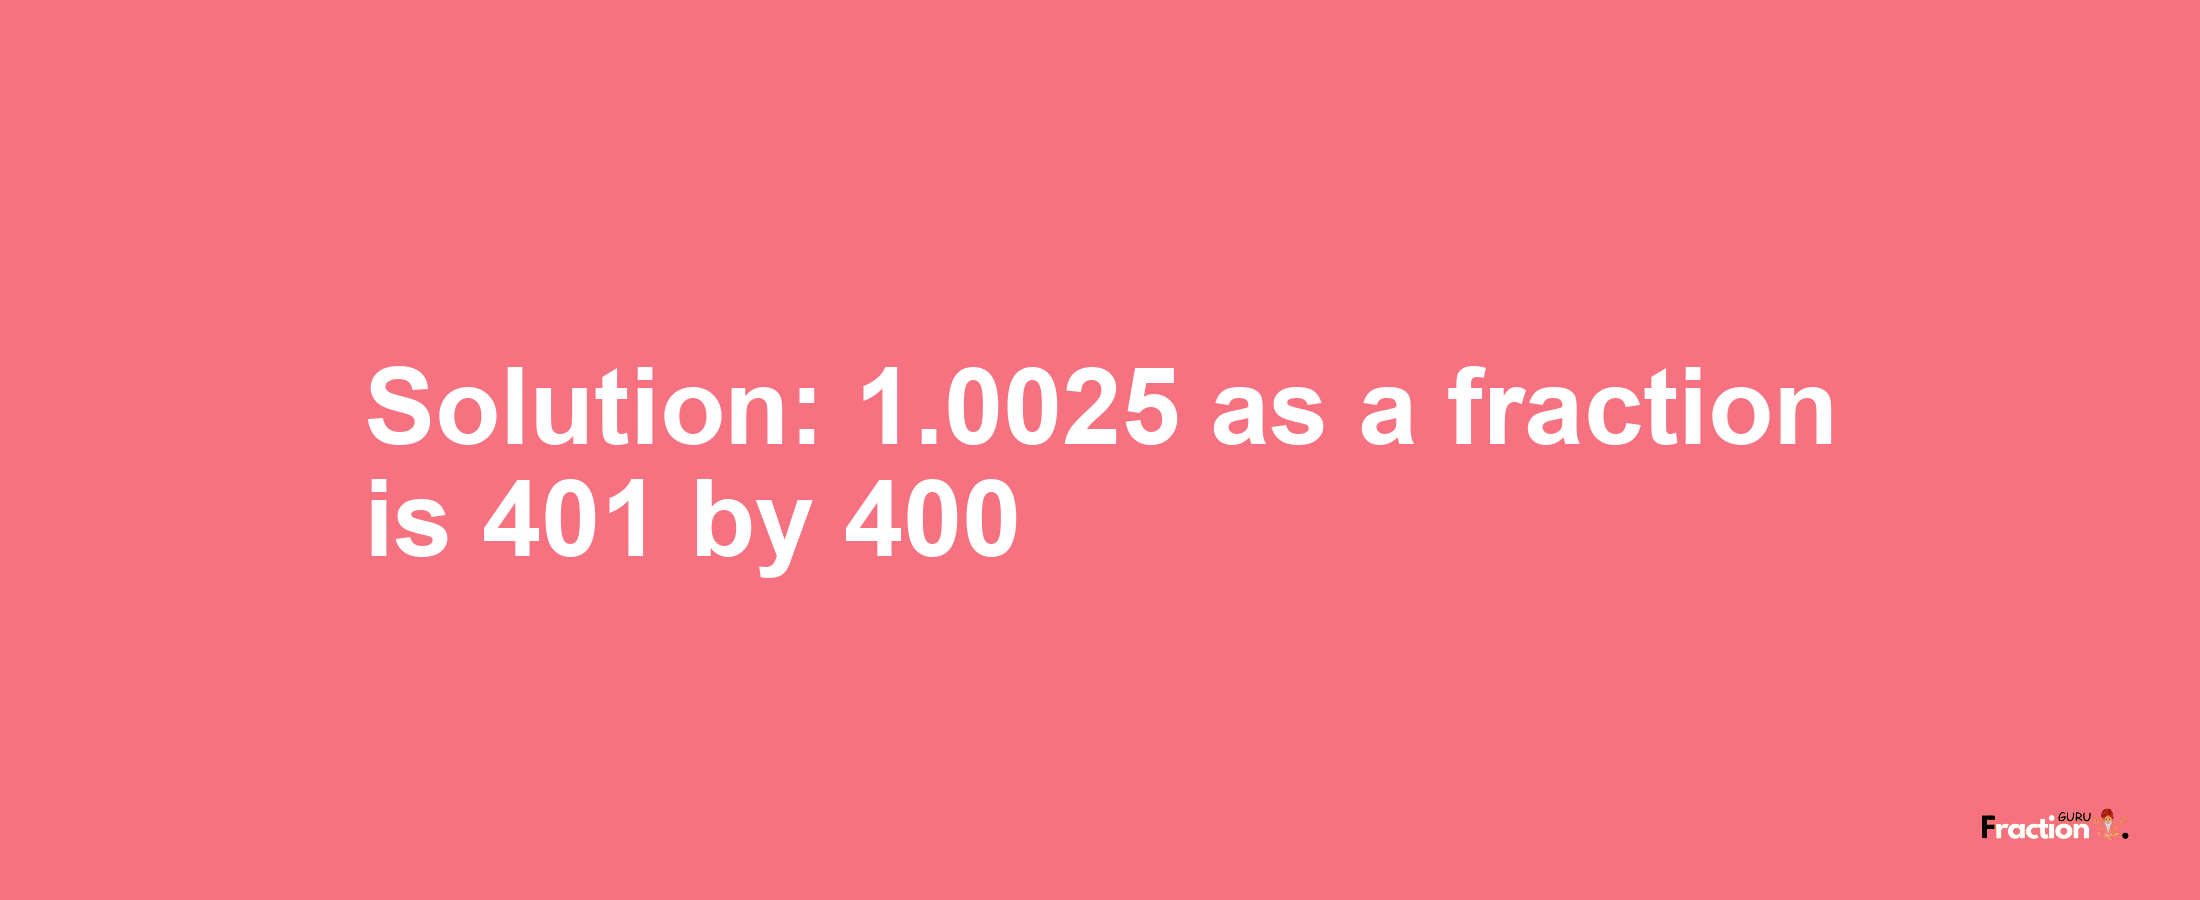 Solution:1.0025 as a fraction is 401/400